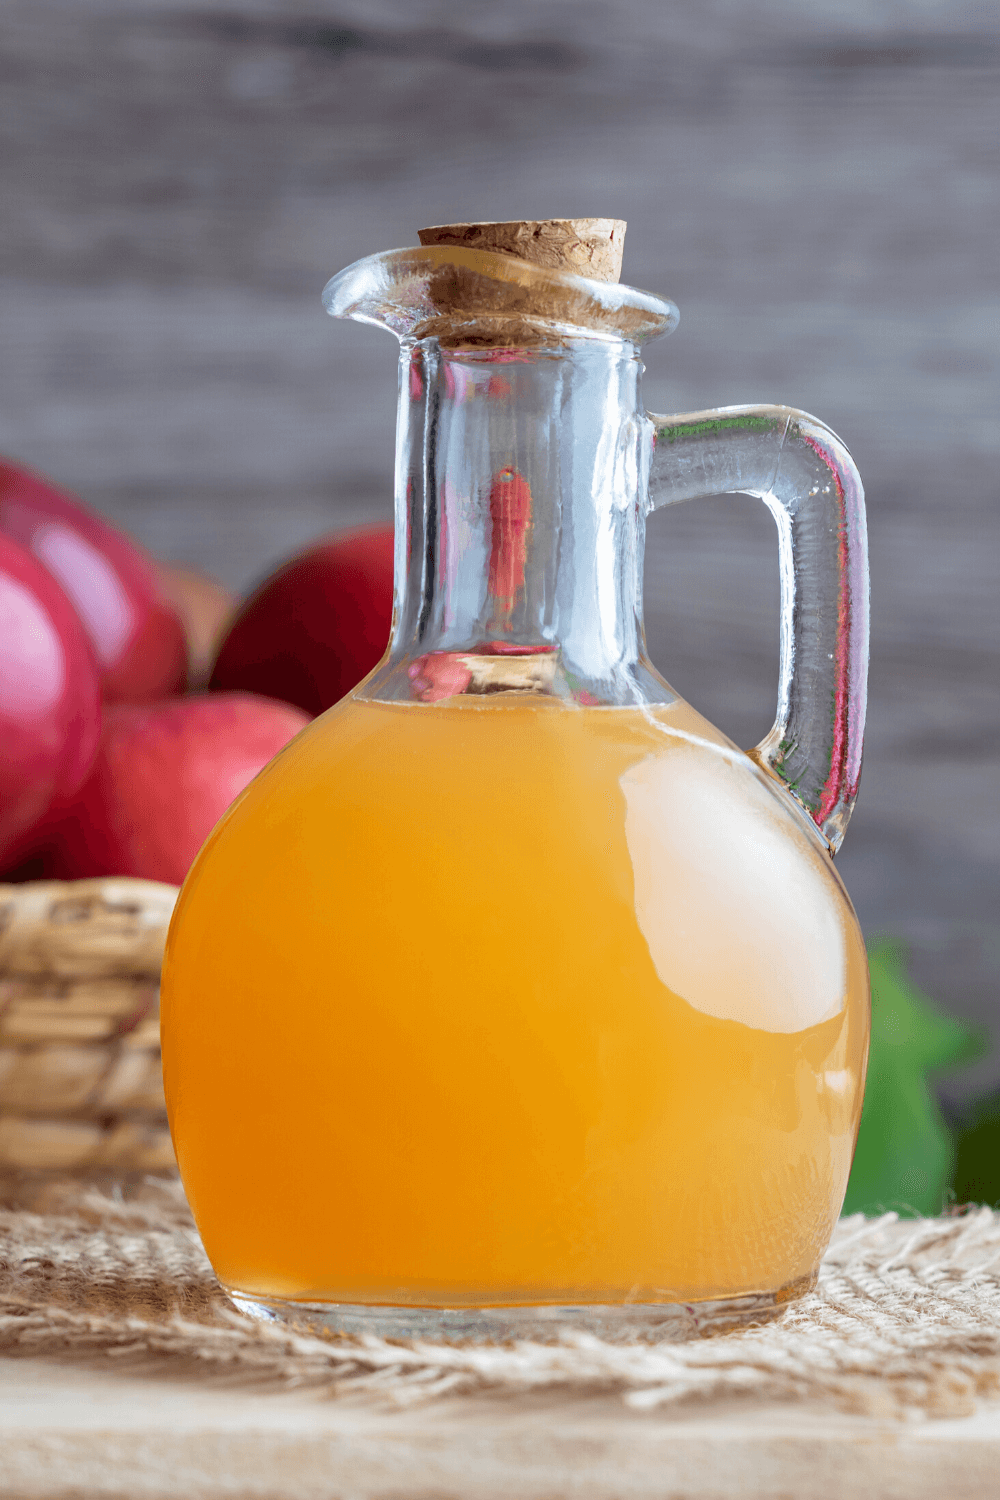 6 Real Health & Beauty Benefits of Using Apple Cider Vinegar (and 3 Risks)!